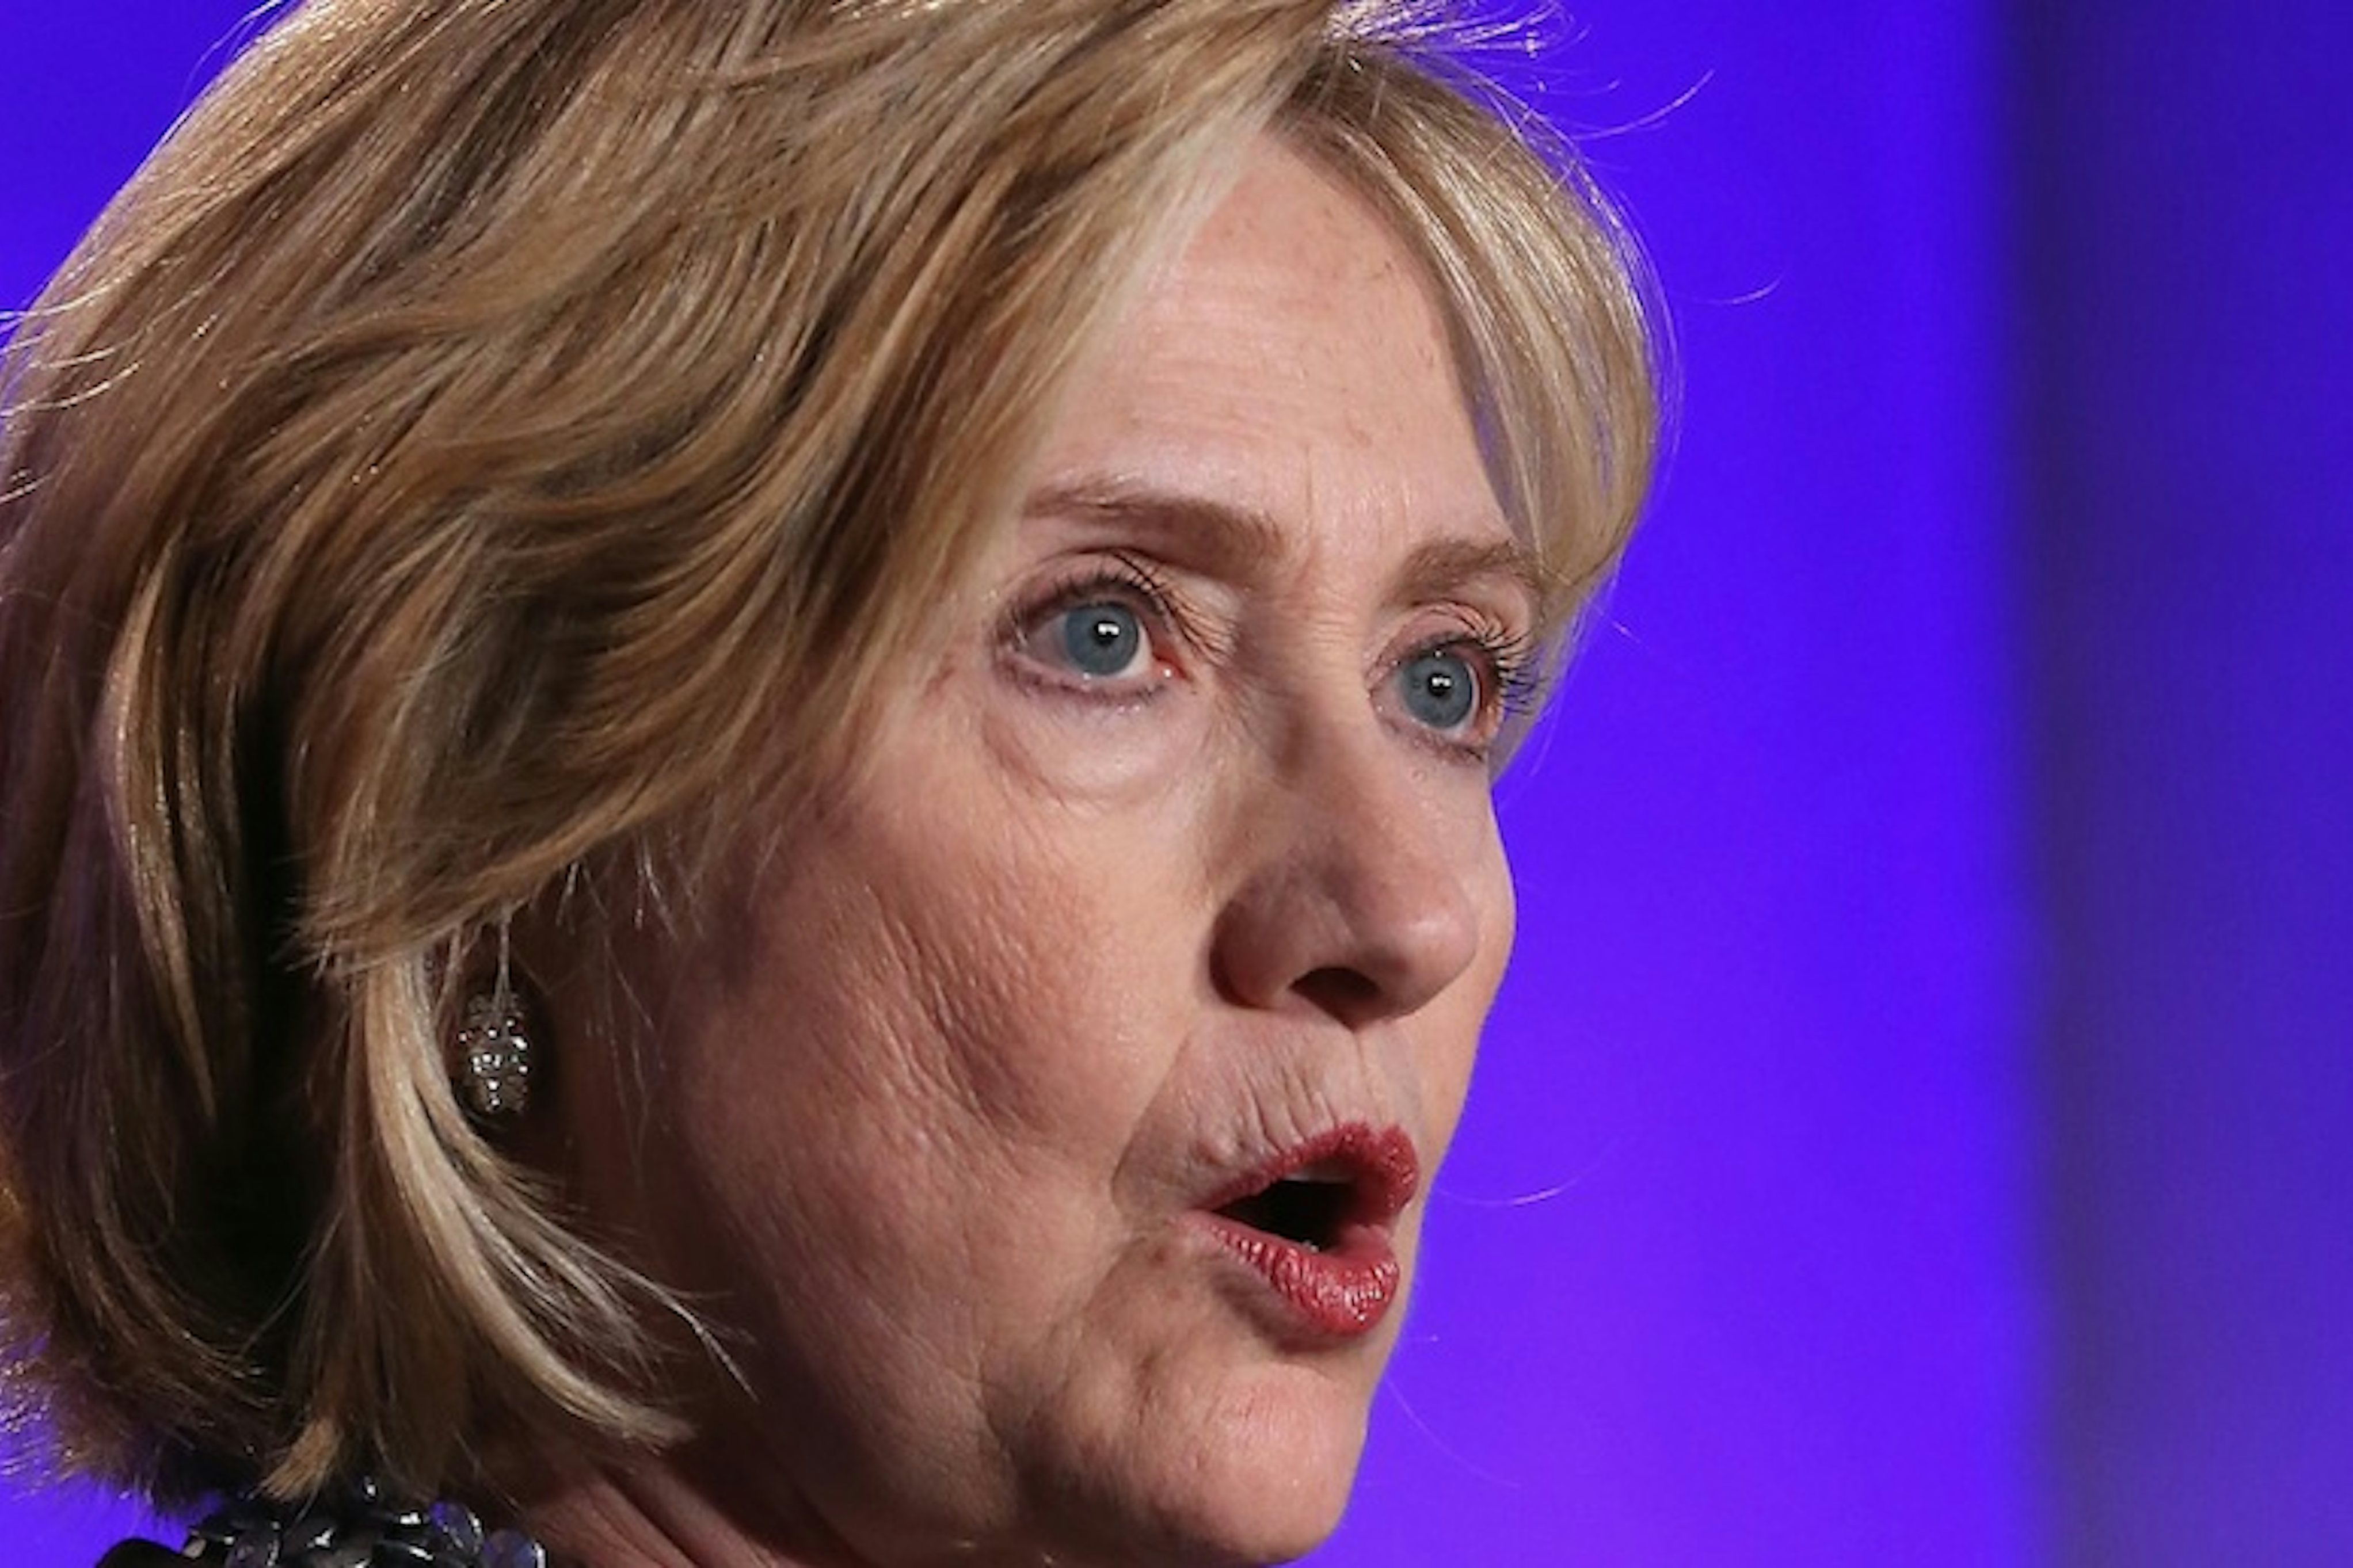 Hillary Clinton 2016: Her Plan to Prevent a Liberal Primary Challenger